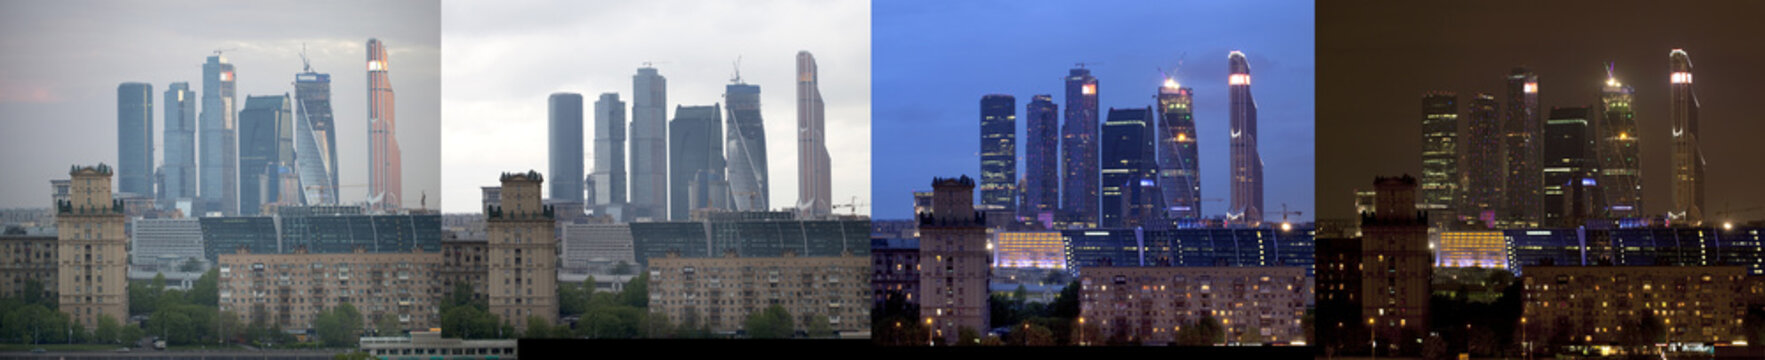 Buildings of Moscow City